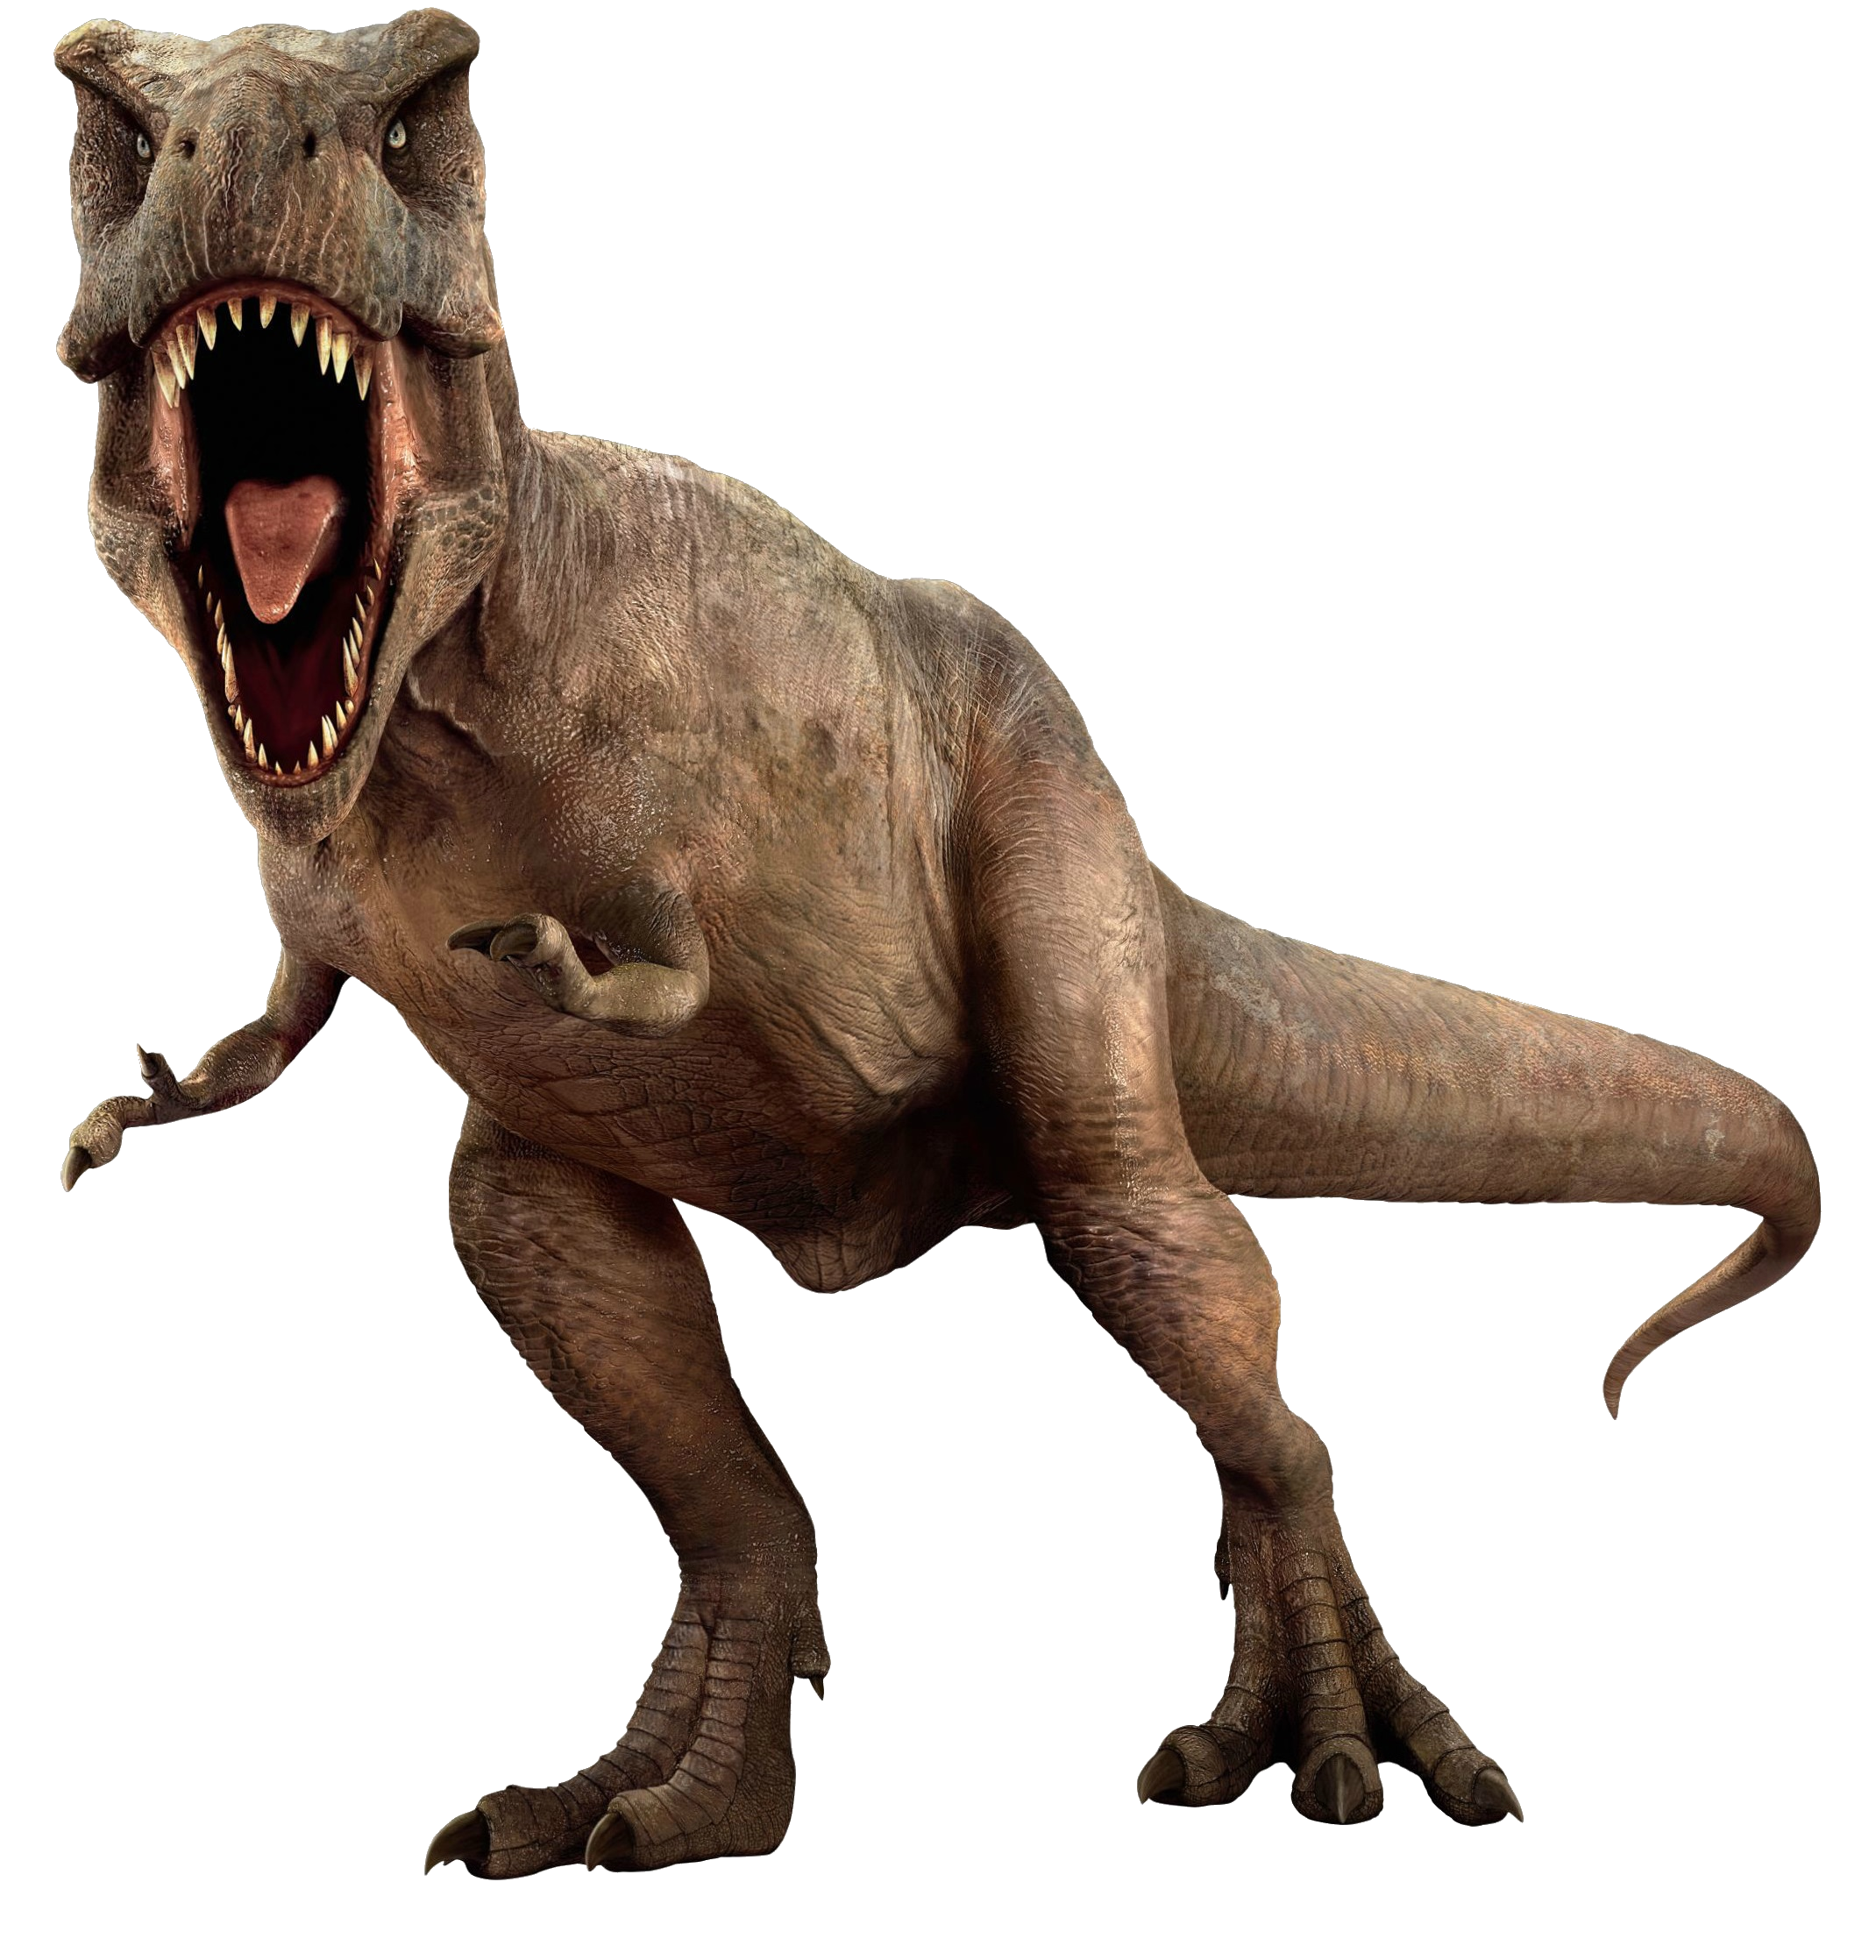 Dinosaur PNGs for Free Download